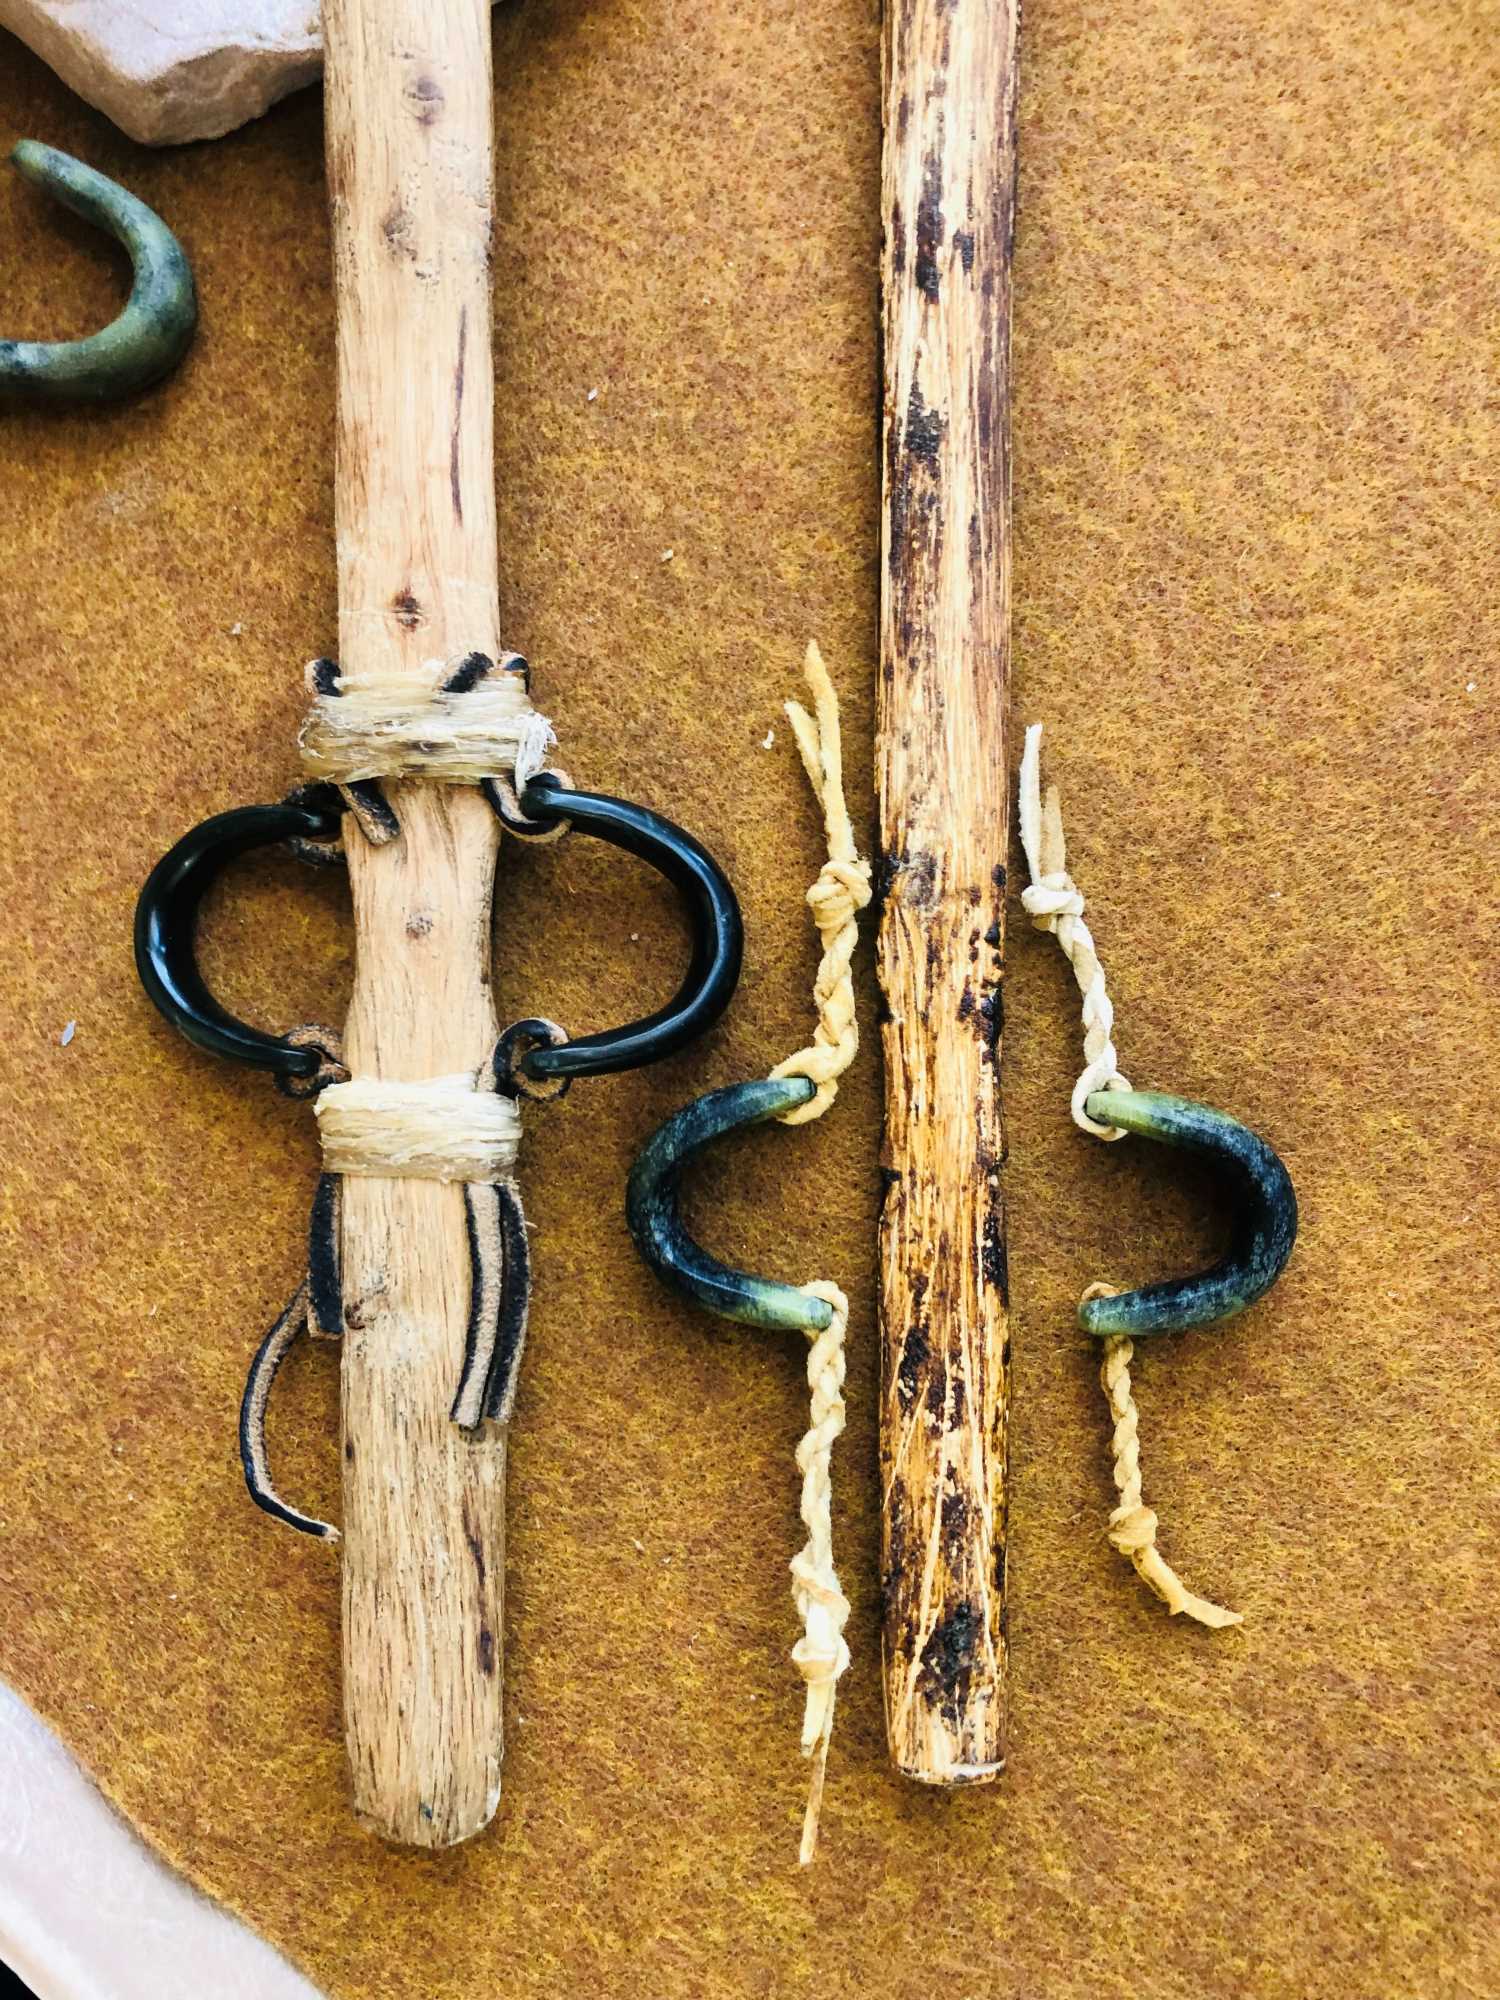 These are replicas I made showing how the stone loops may have been hafted onto the atlatl.